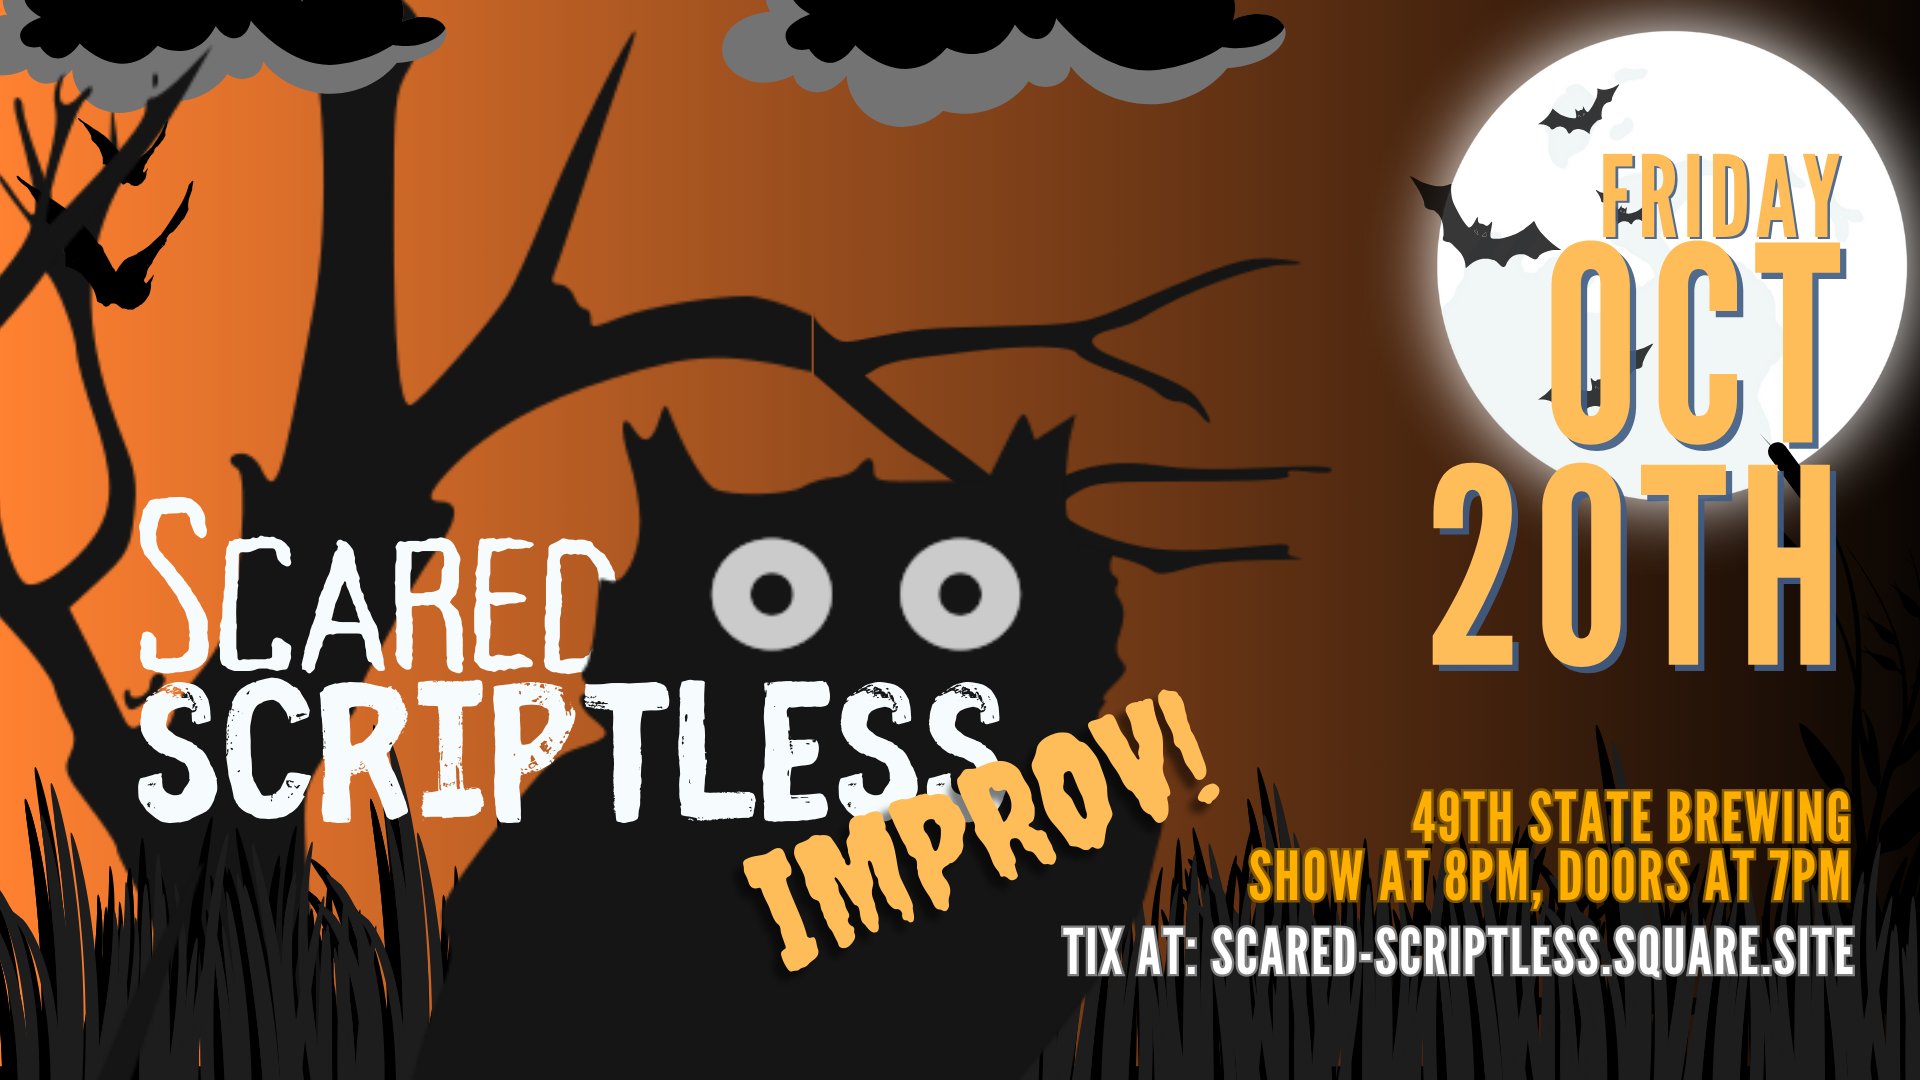 Scare Scriptless, improv, 49th State Brewing, Halloween